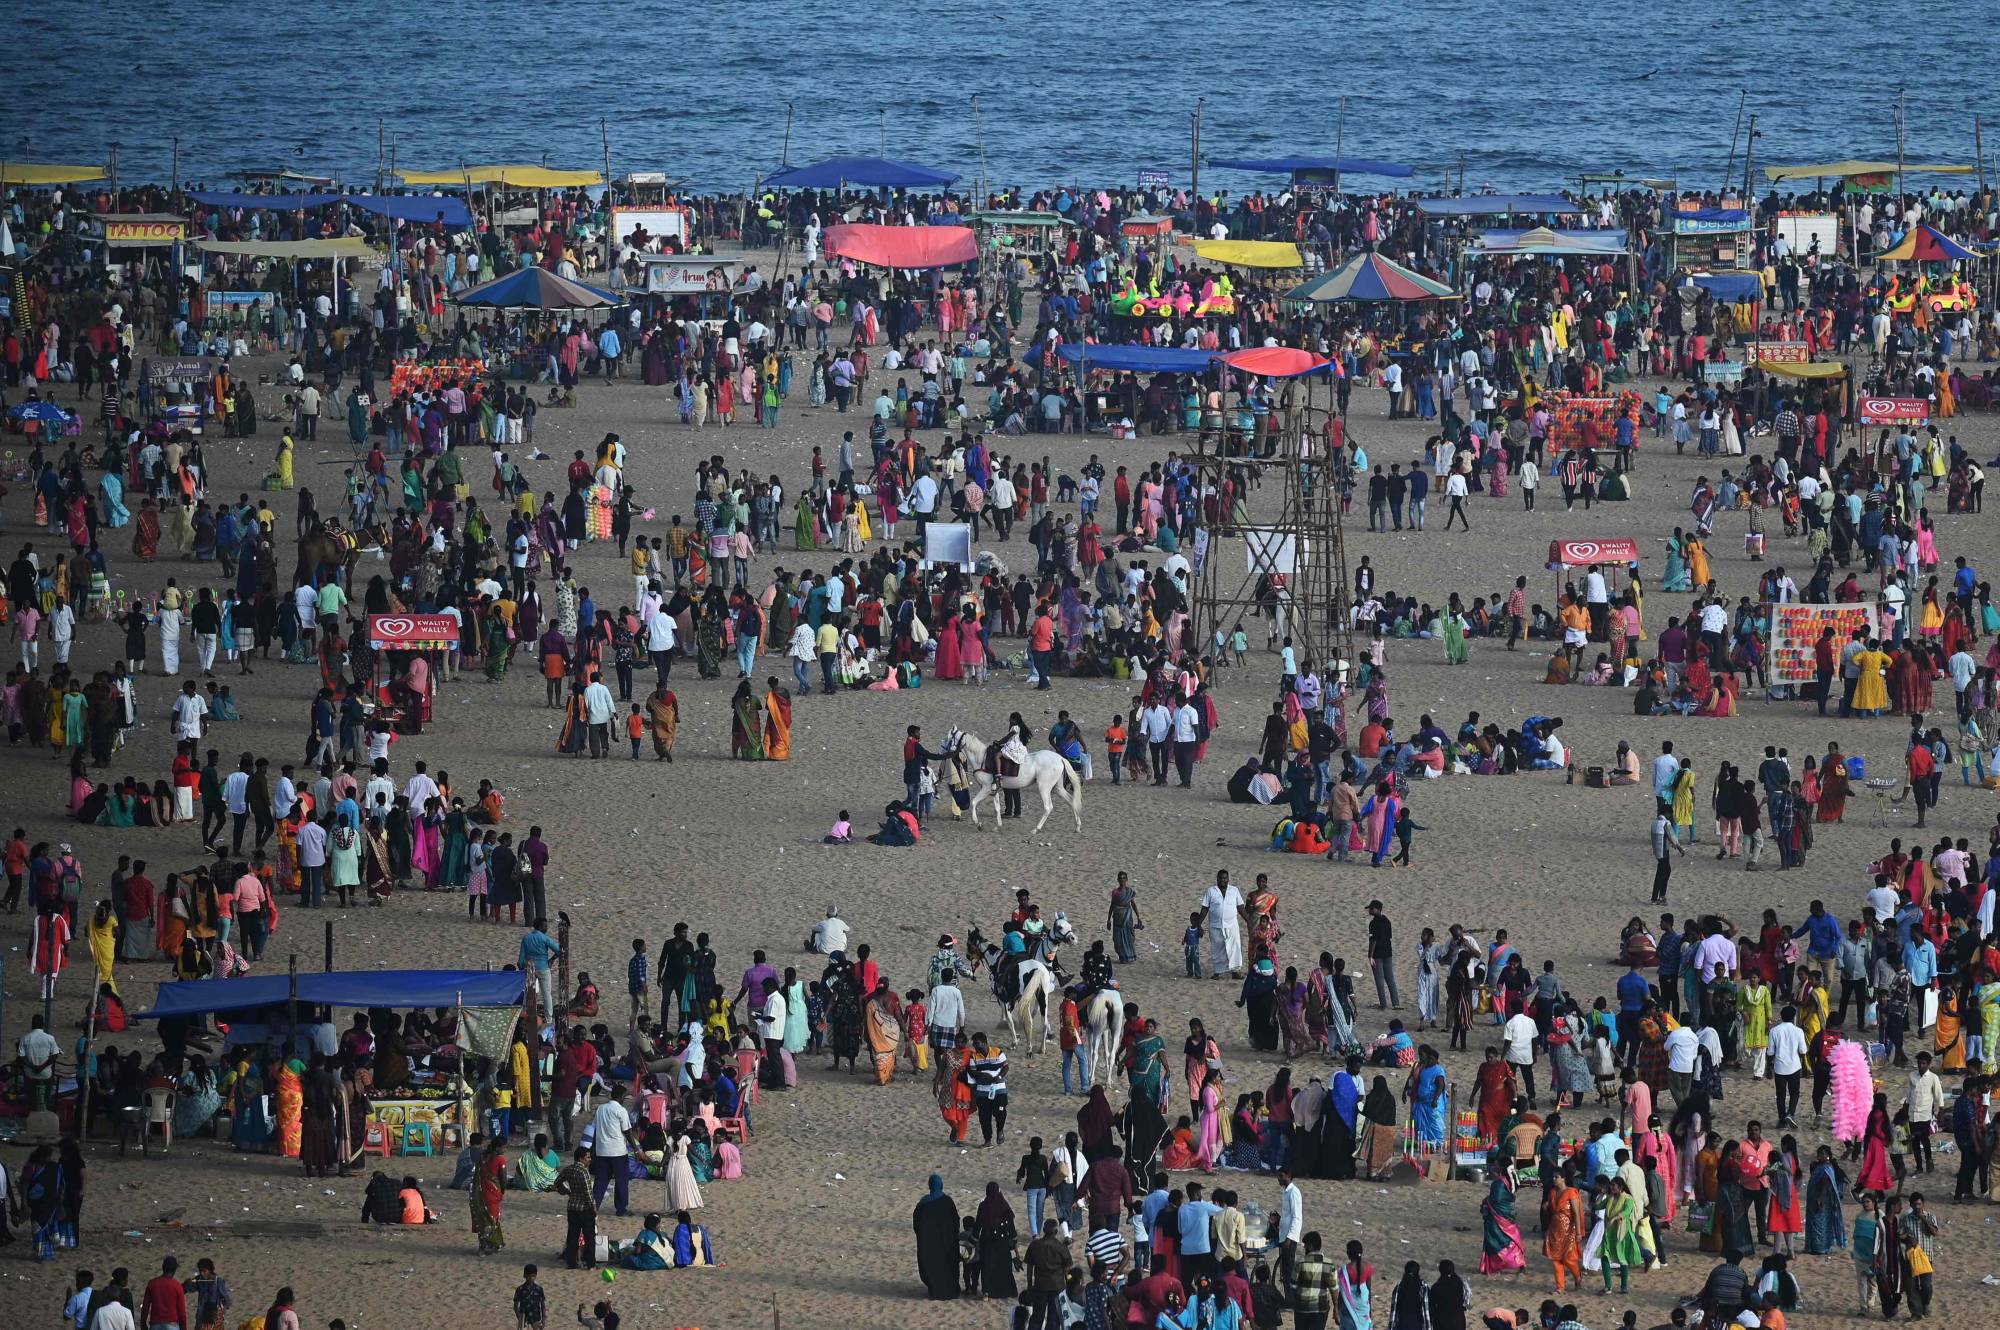 People gather at Marina beach on the occasion of the Hindu harvest festival of 'Pongal' in Chennai, India, on Tuesday. | AFP-JIJI